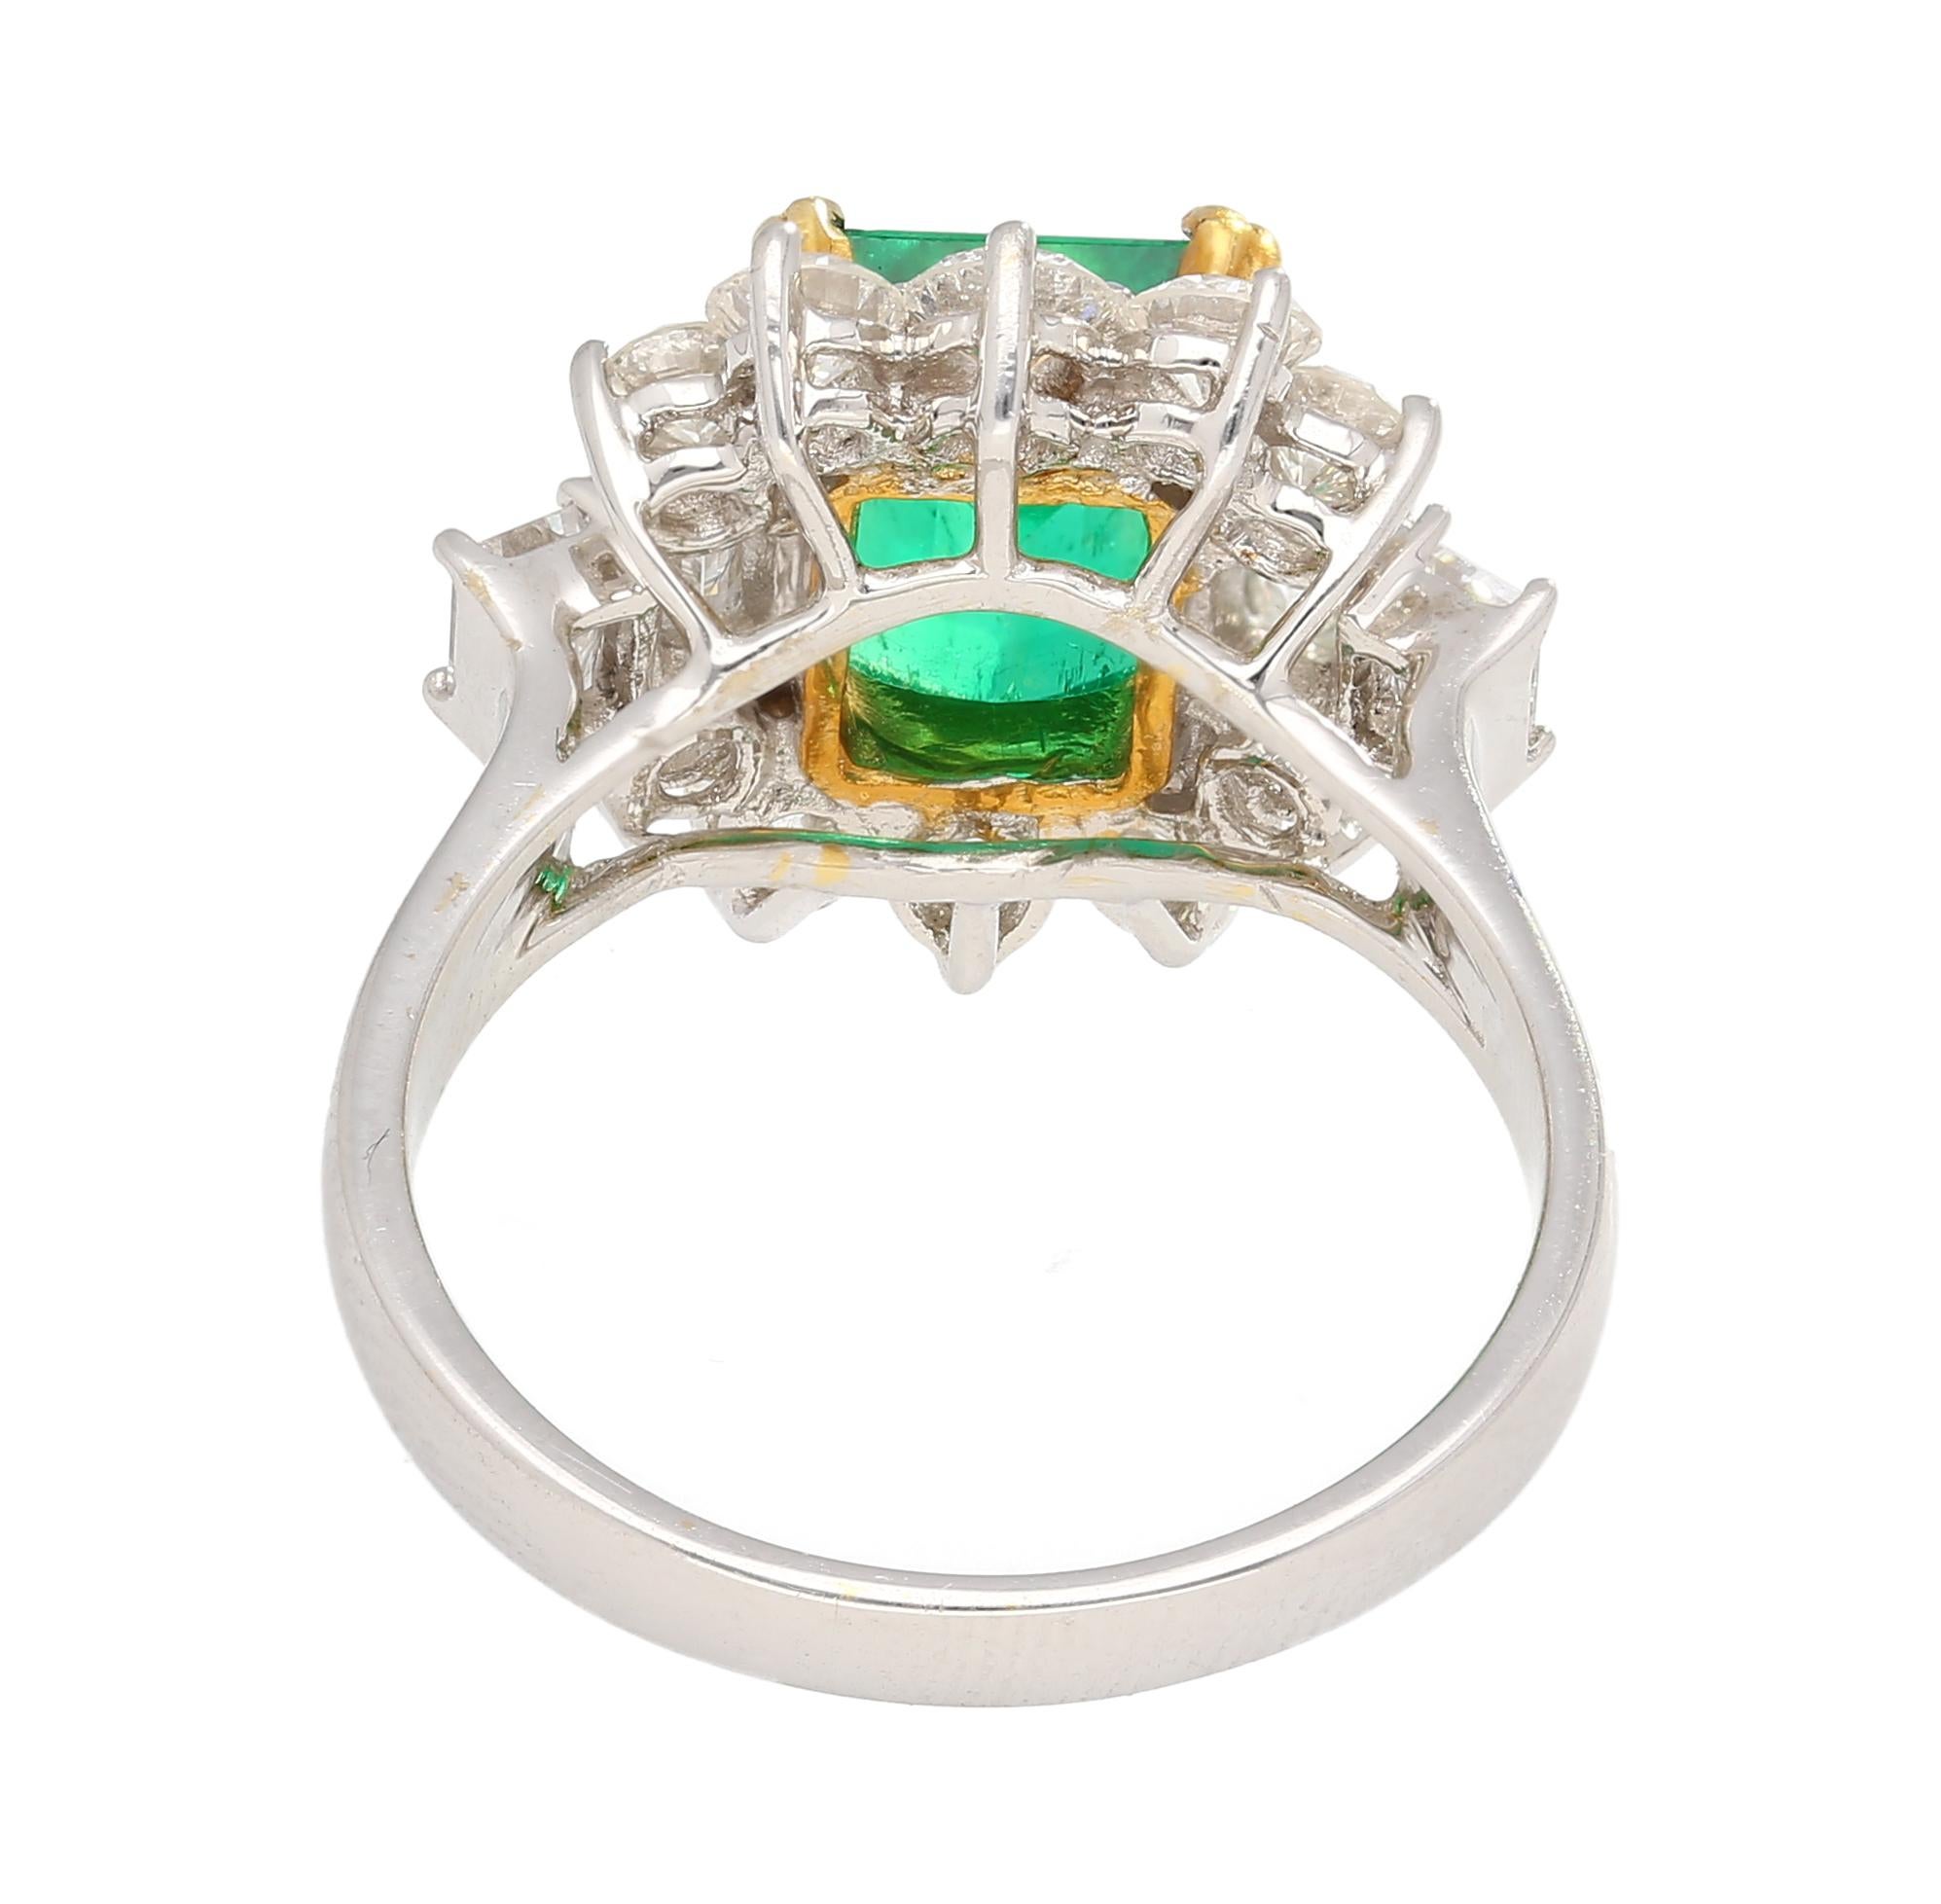 A magnificent natural emerald and diamond ring in 18k white and yellow gold. Set with a 2.55 carat Colombian emerald center stone. Complemented by 4 emerald-cut diamond side stones beside 10 round brilliant-cut diamonds. All of which are F-G color